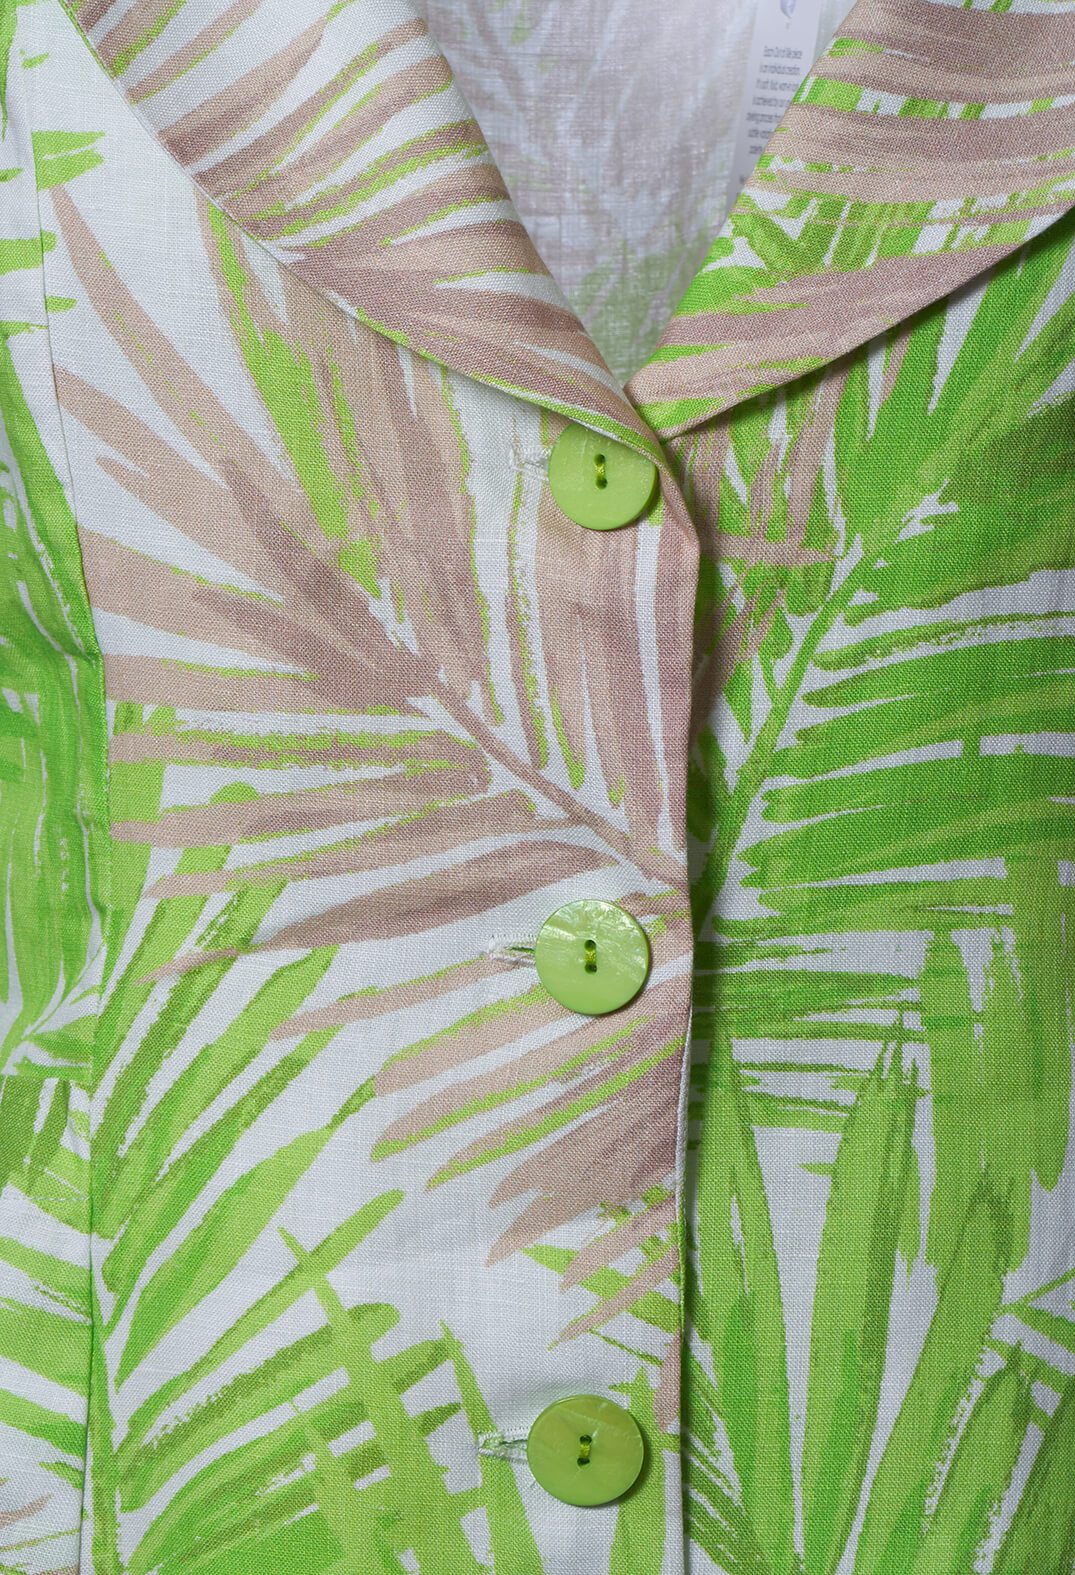 Printed Linen Jacket in Lime